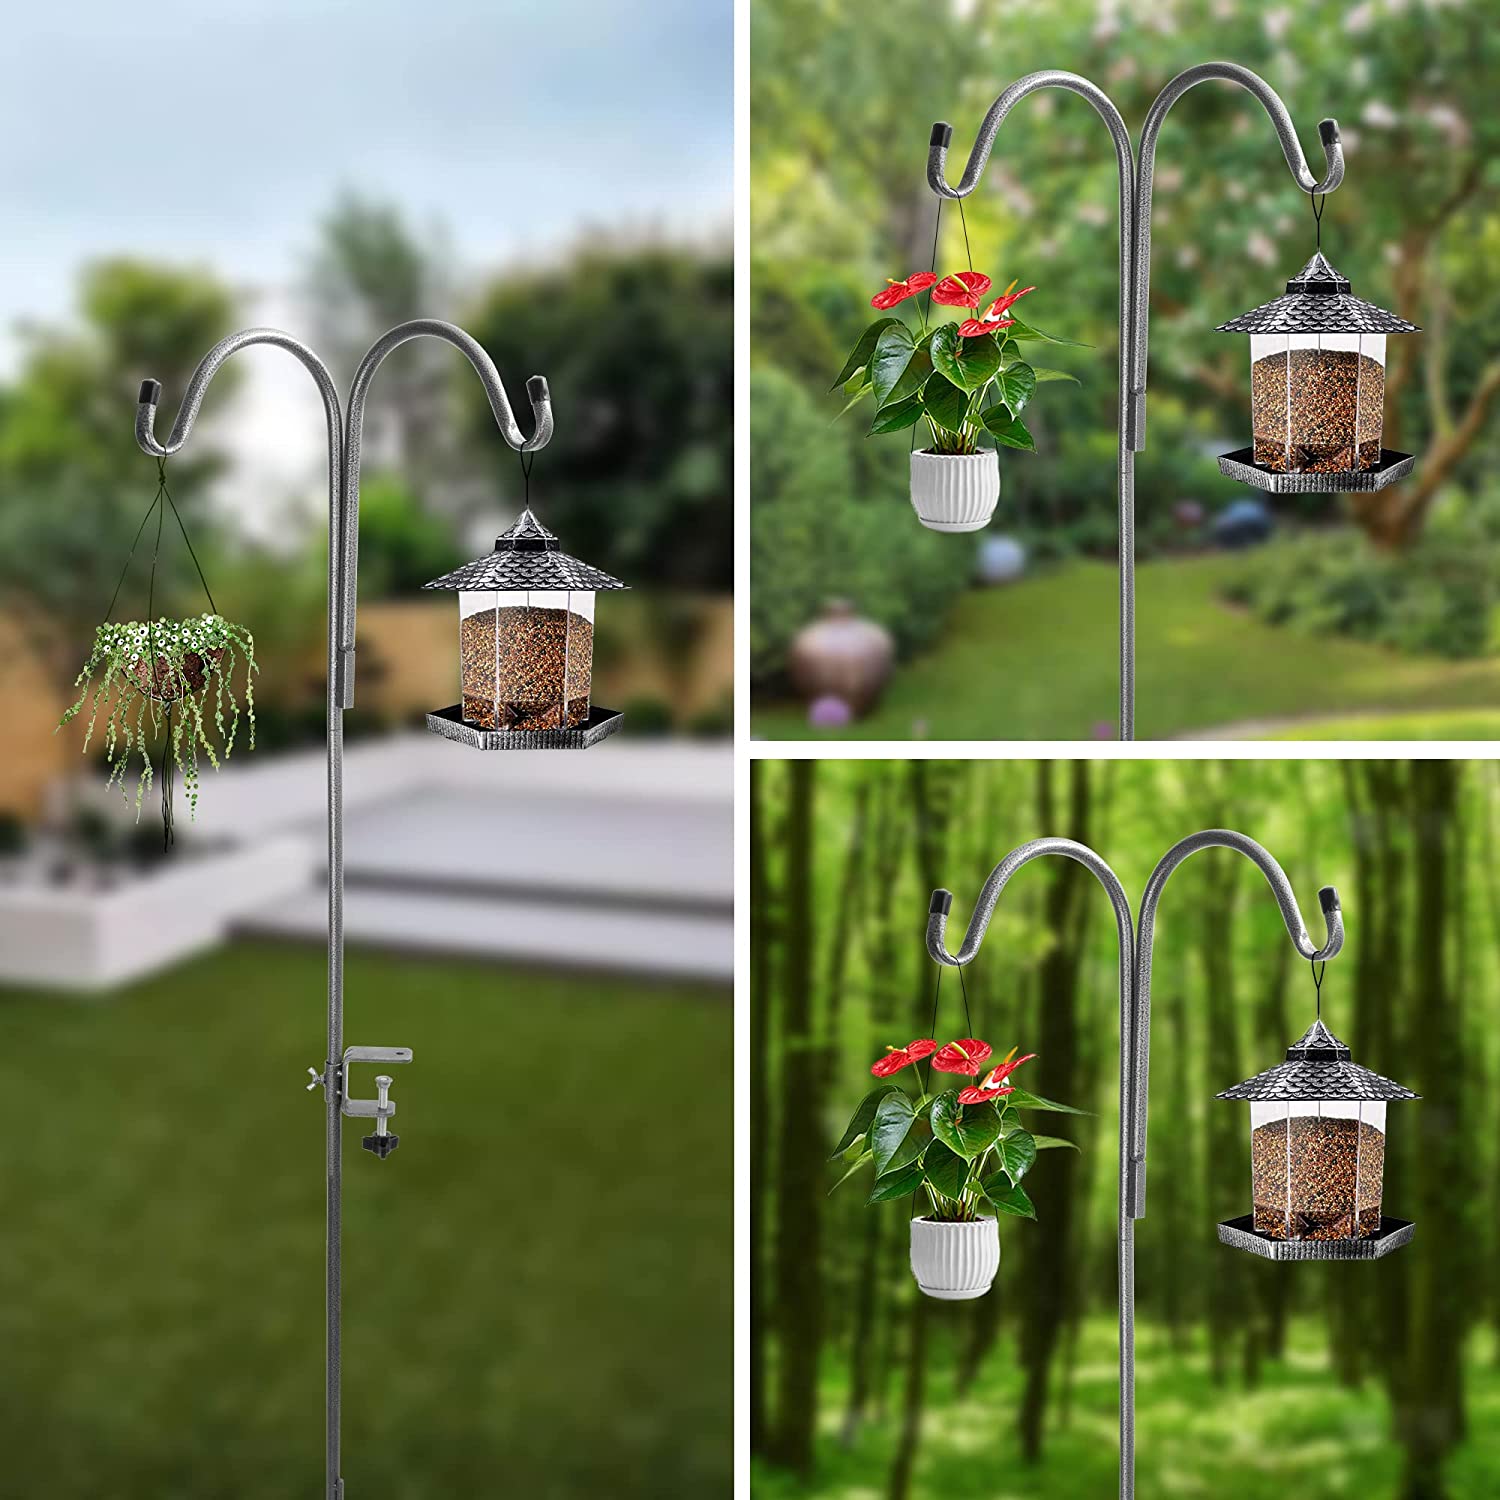 Double Shepherds Hook Adjustable Bird Feeder Pole for Outdoor with 4 Prongs Base,65 Inch Heavy Duty Garden Hanging Plant Hooks Stand Outside for Plant Hanger Wedding Decoration (Pack of 1) - image 3 of 7